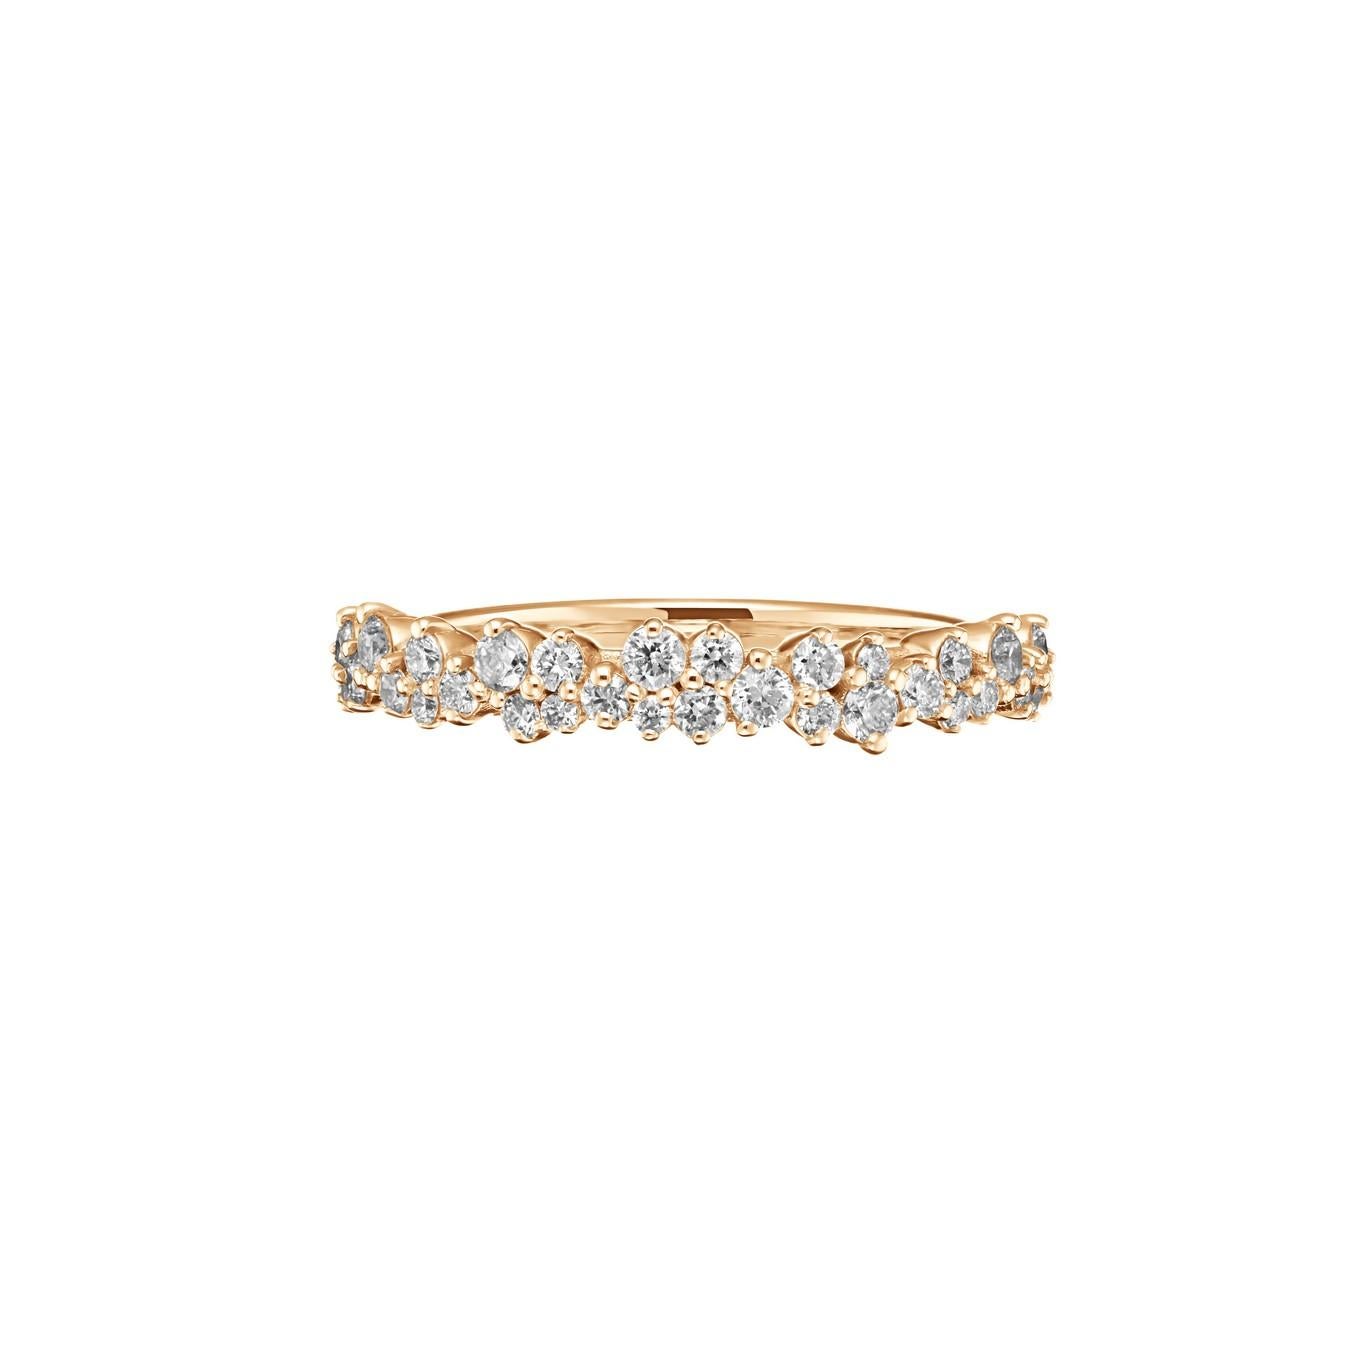 Introducing Harmony, 18k Gold and Round Brilliant Diamond Band - a stunning piece of jewelry that exudes elegance, sophistication, and timeless beauty.

Crafted from premium 18k gold and featuring a classic design of round brilliant diamonds, this